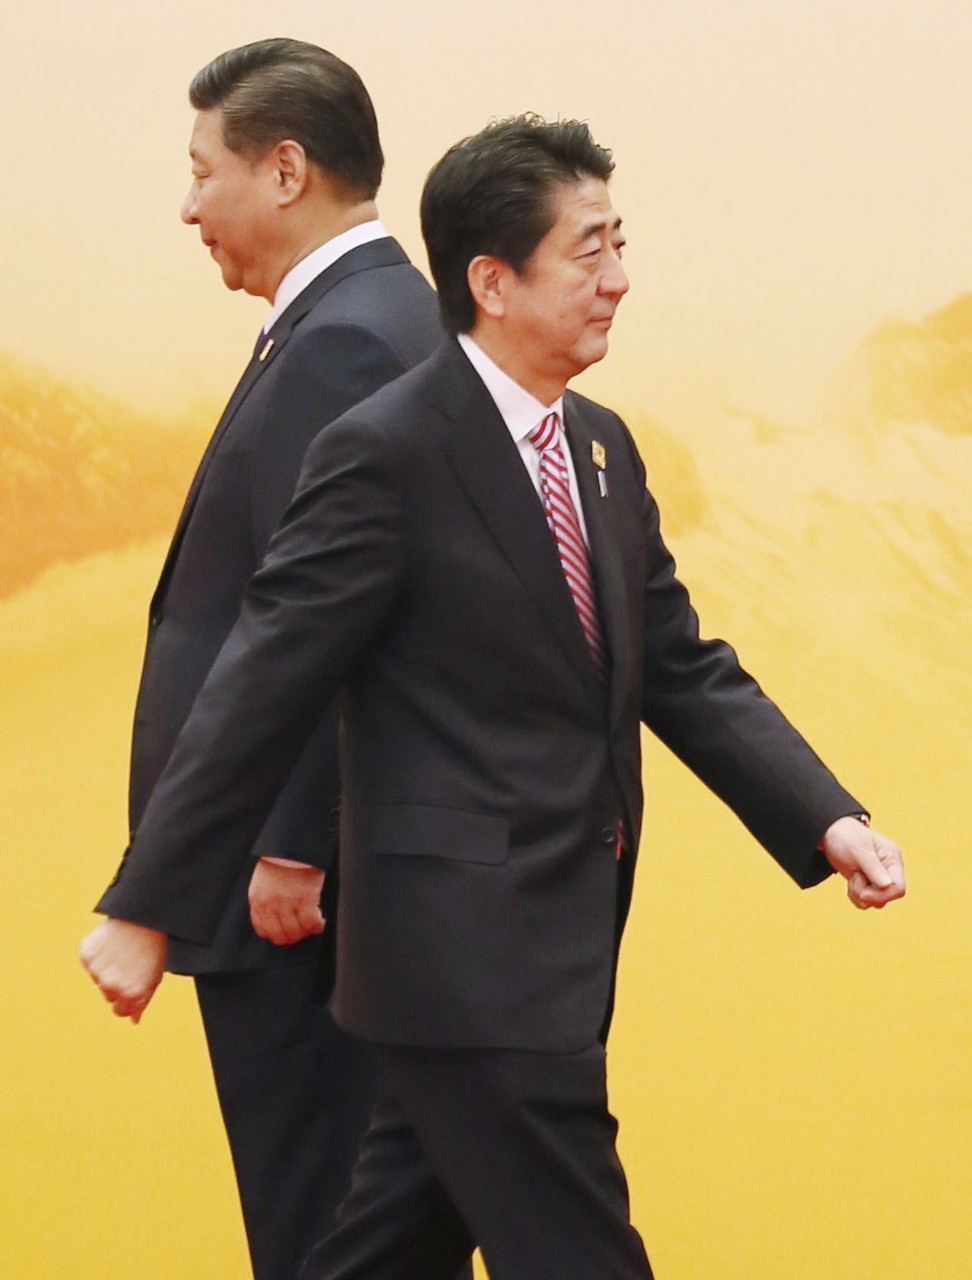 Japanese Prime Minister Shinzo Abe walks on after shaking hands with Chinese President Xi Jinping at the summit of Asia-Pacific Economic Cooperation forum in Beijing in 2014. In their most recent meeting in July this year, the two discussed their joint contribution towards affirming the stability and prosperity of Asia and the wider world, including, most significantly, through the belt and road. Photo: Kyodo